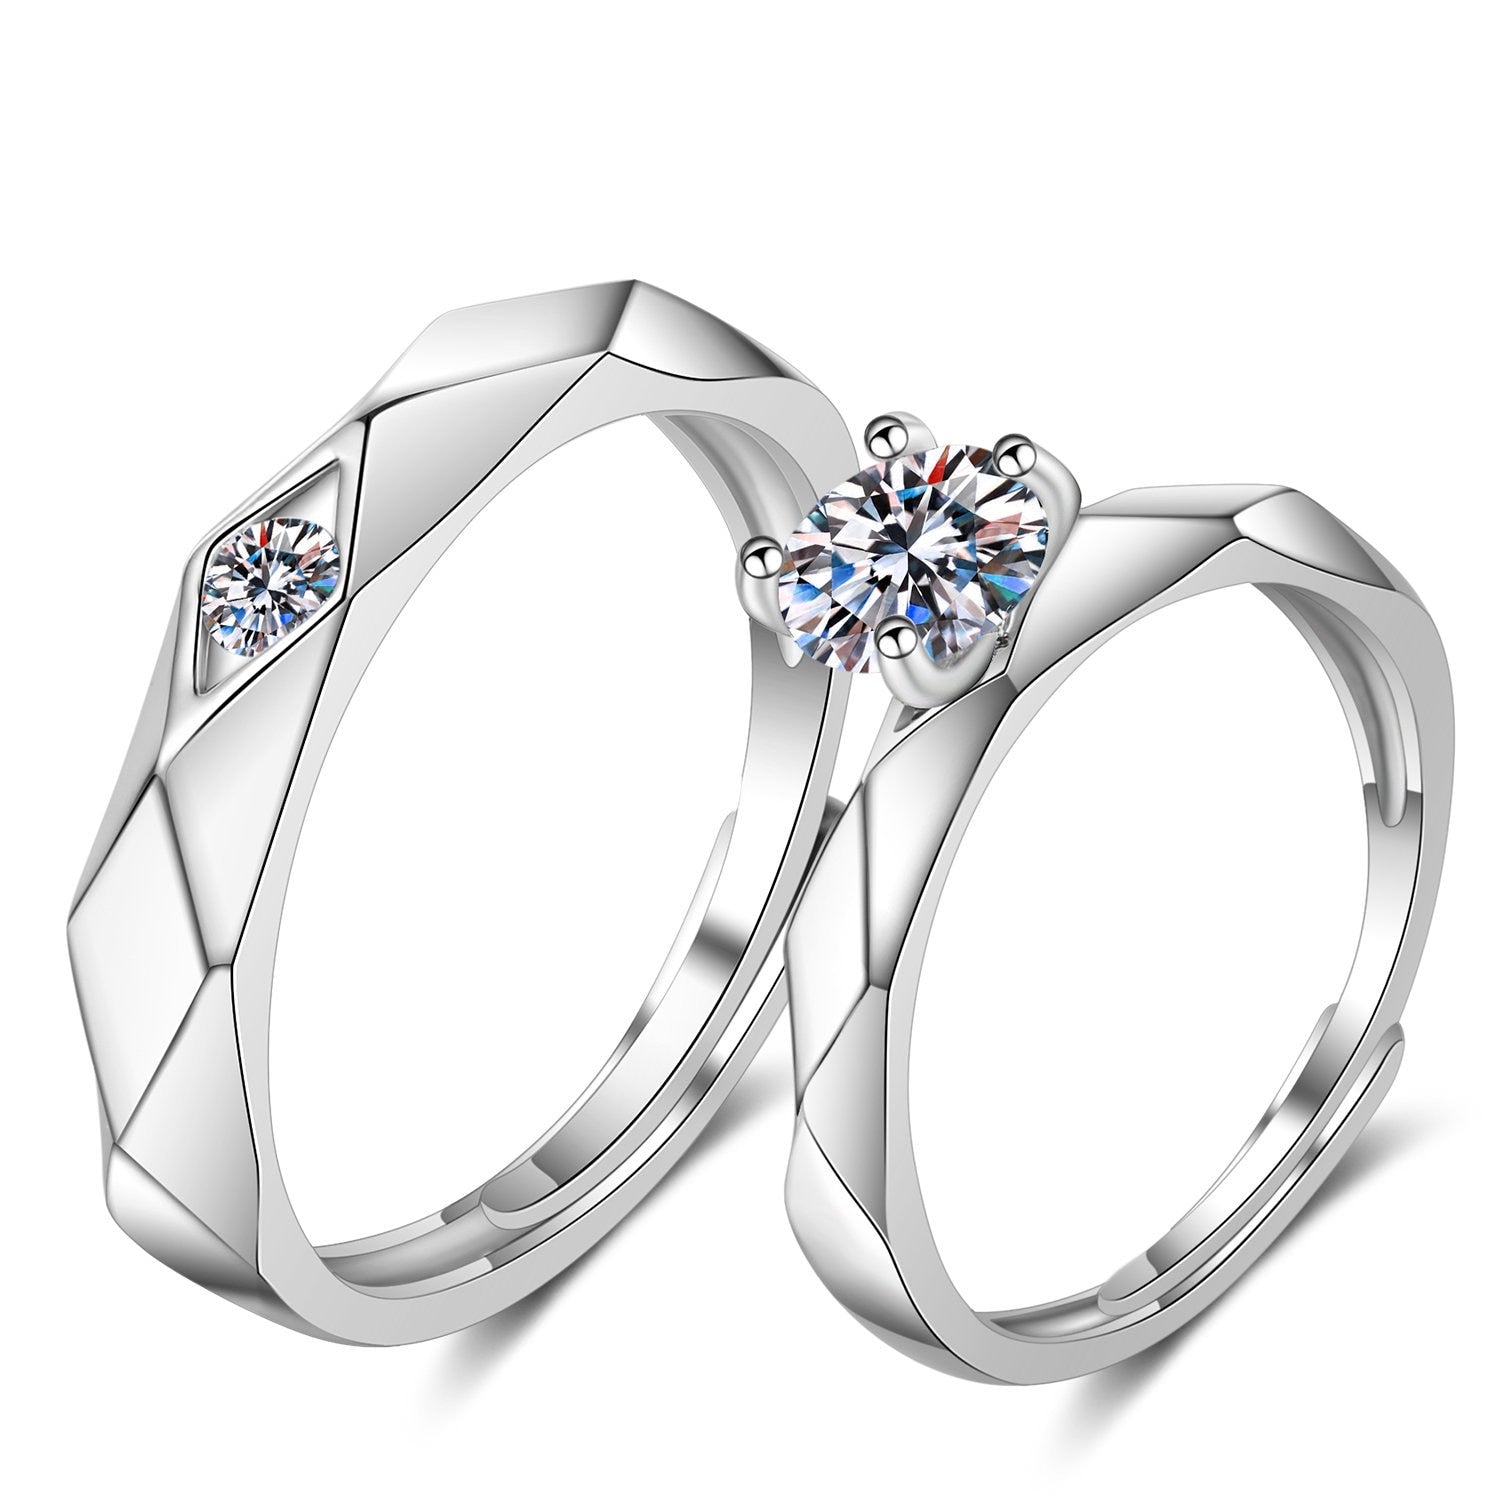 Blue Crystal Modern Couples Rings